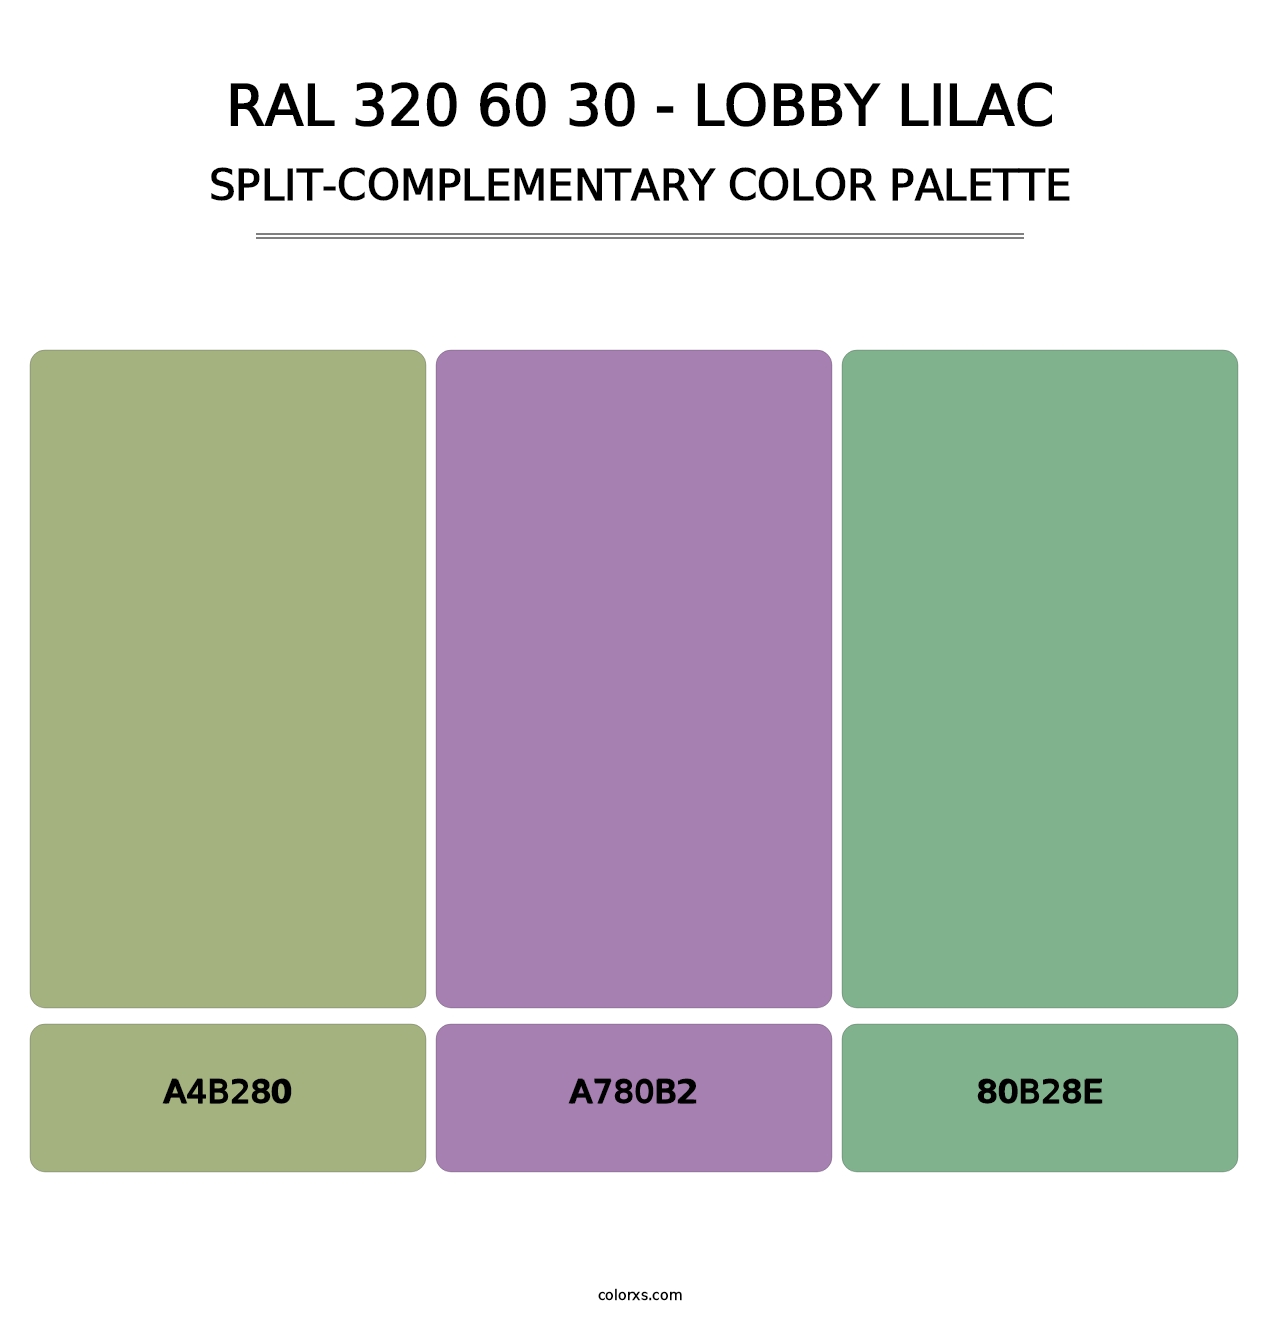 RAL 320 60 30 - Lobby Lilac - Split-Complementary Color Palette